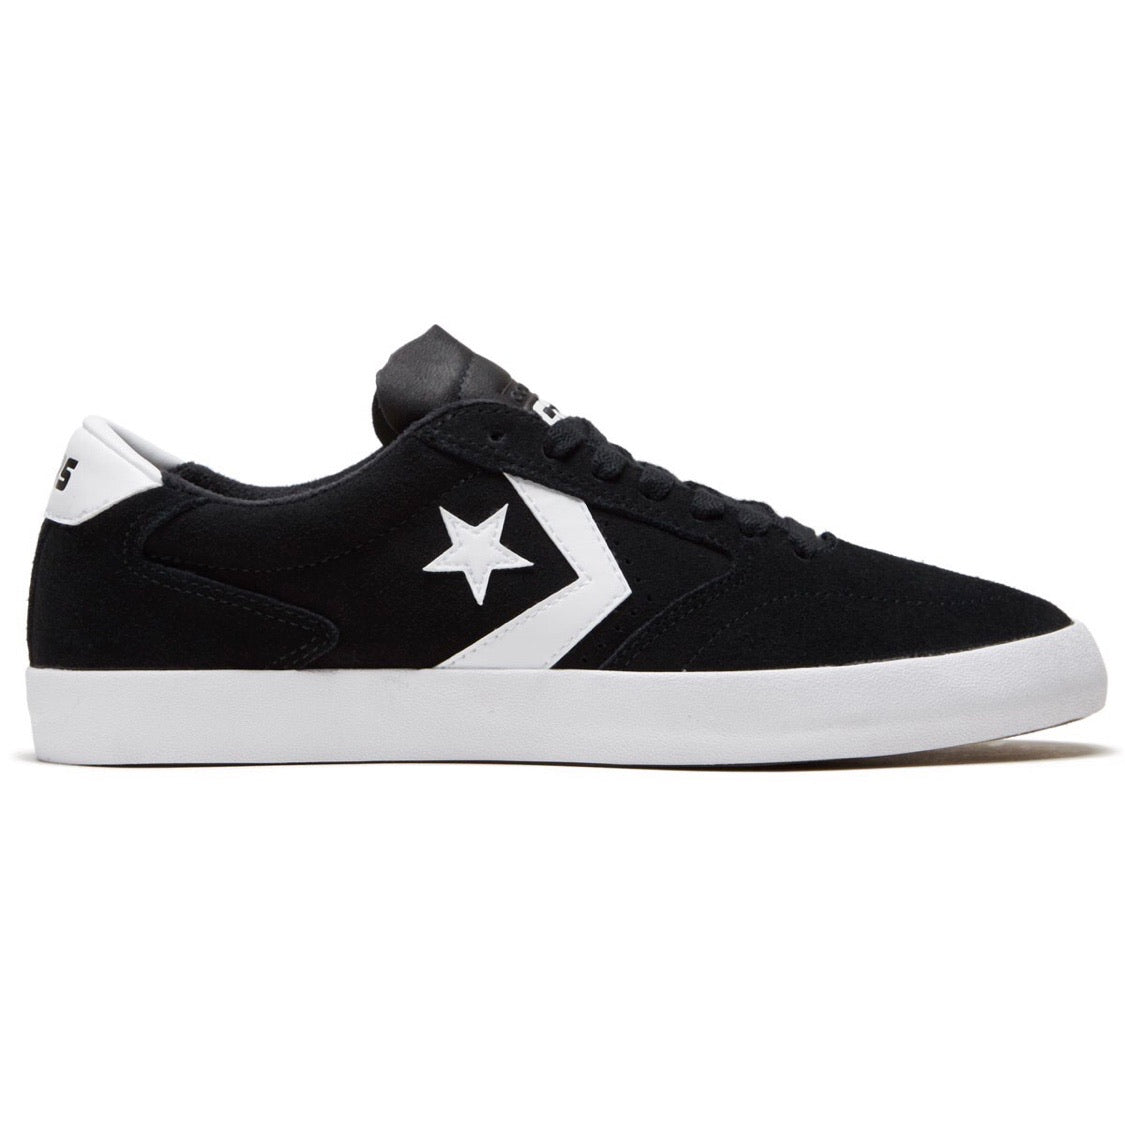 CONVERSE PRO OX Relief Skate